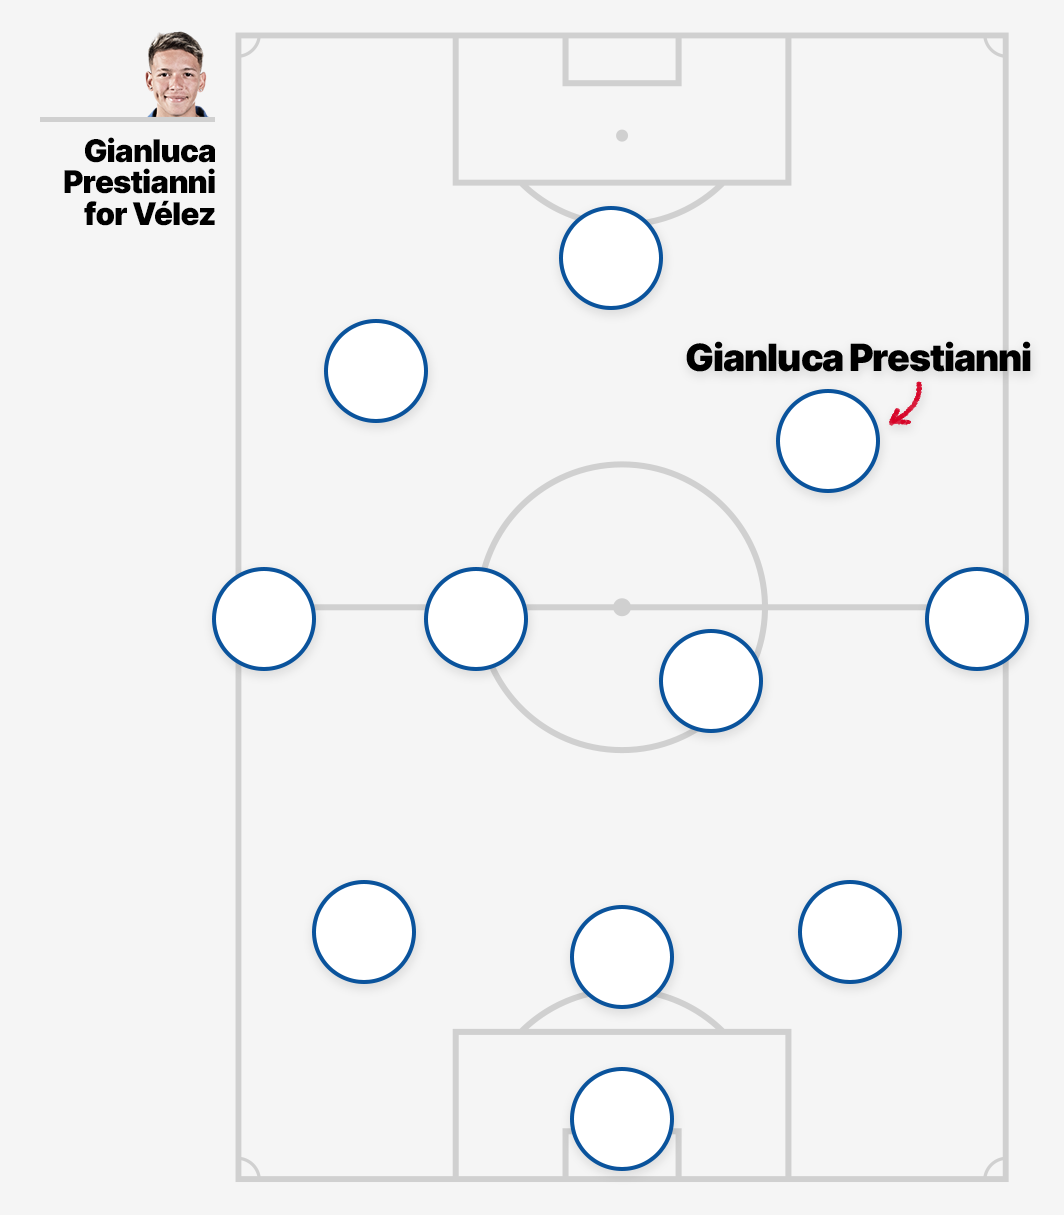 A graphic showing Gianluca Prestianni's usual role in Vélez Sarsfield's 3-4-3 shape.